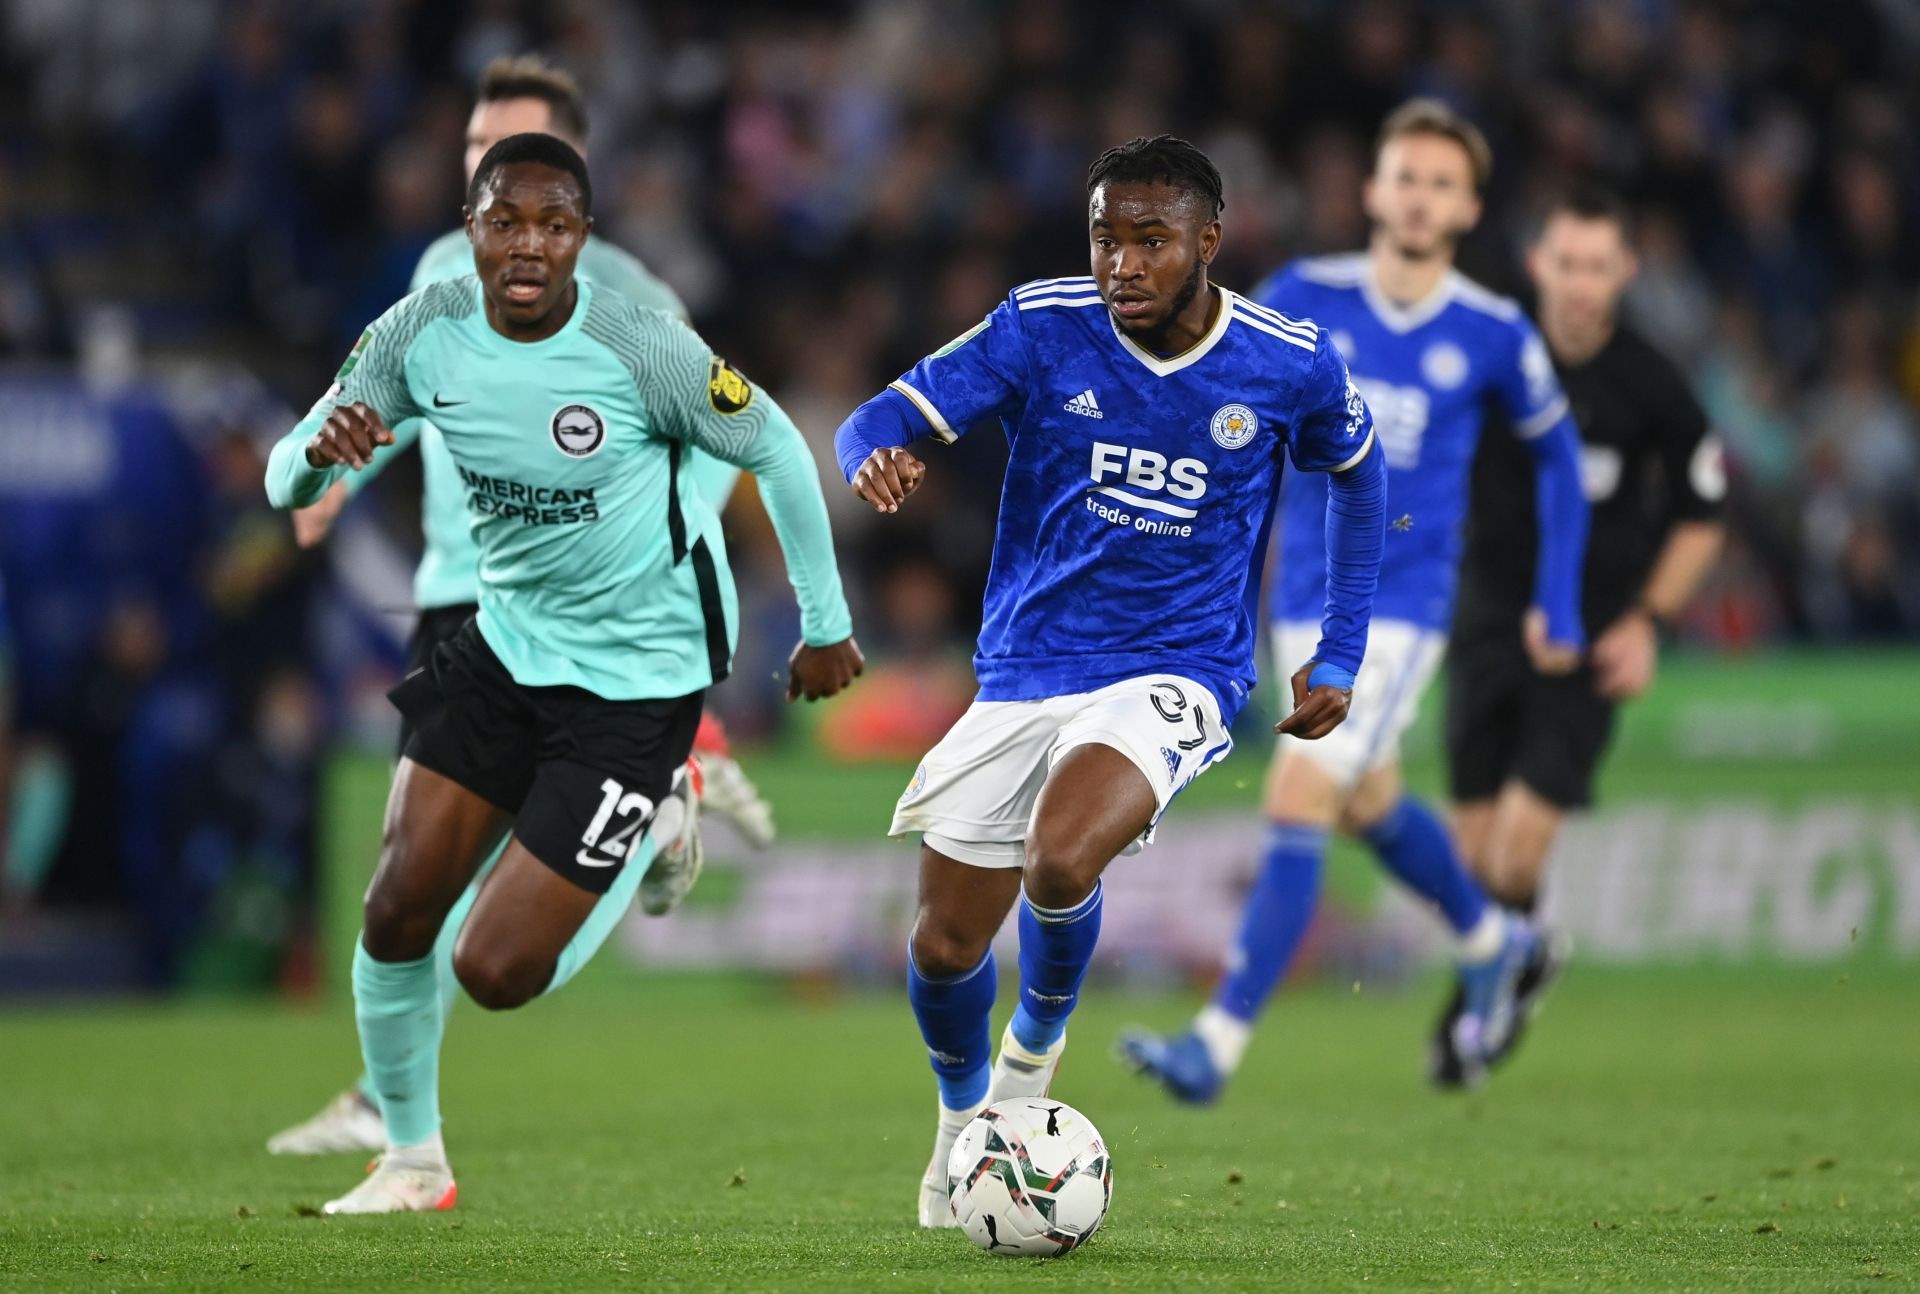 Leicester City and Brighton &amp; Hove Albion square off in their Premier League fixture.